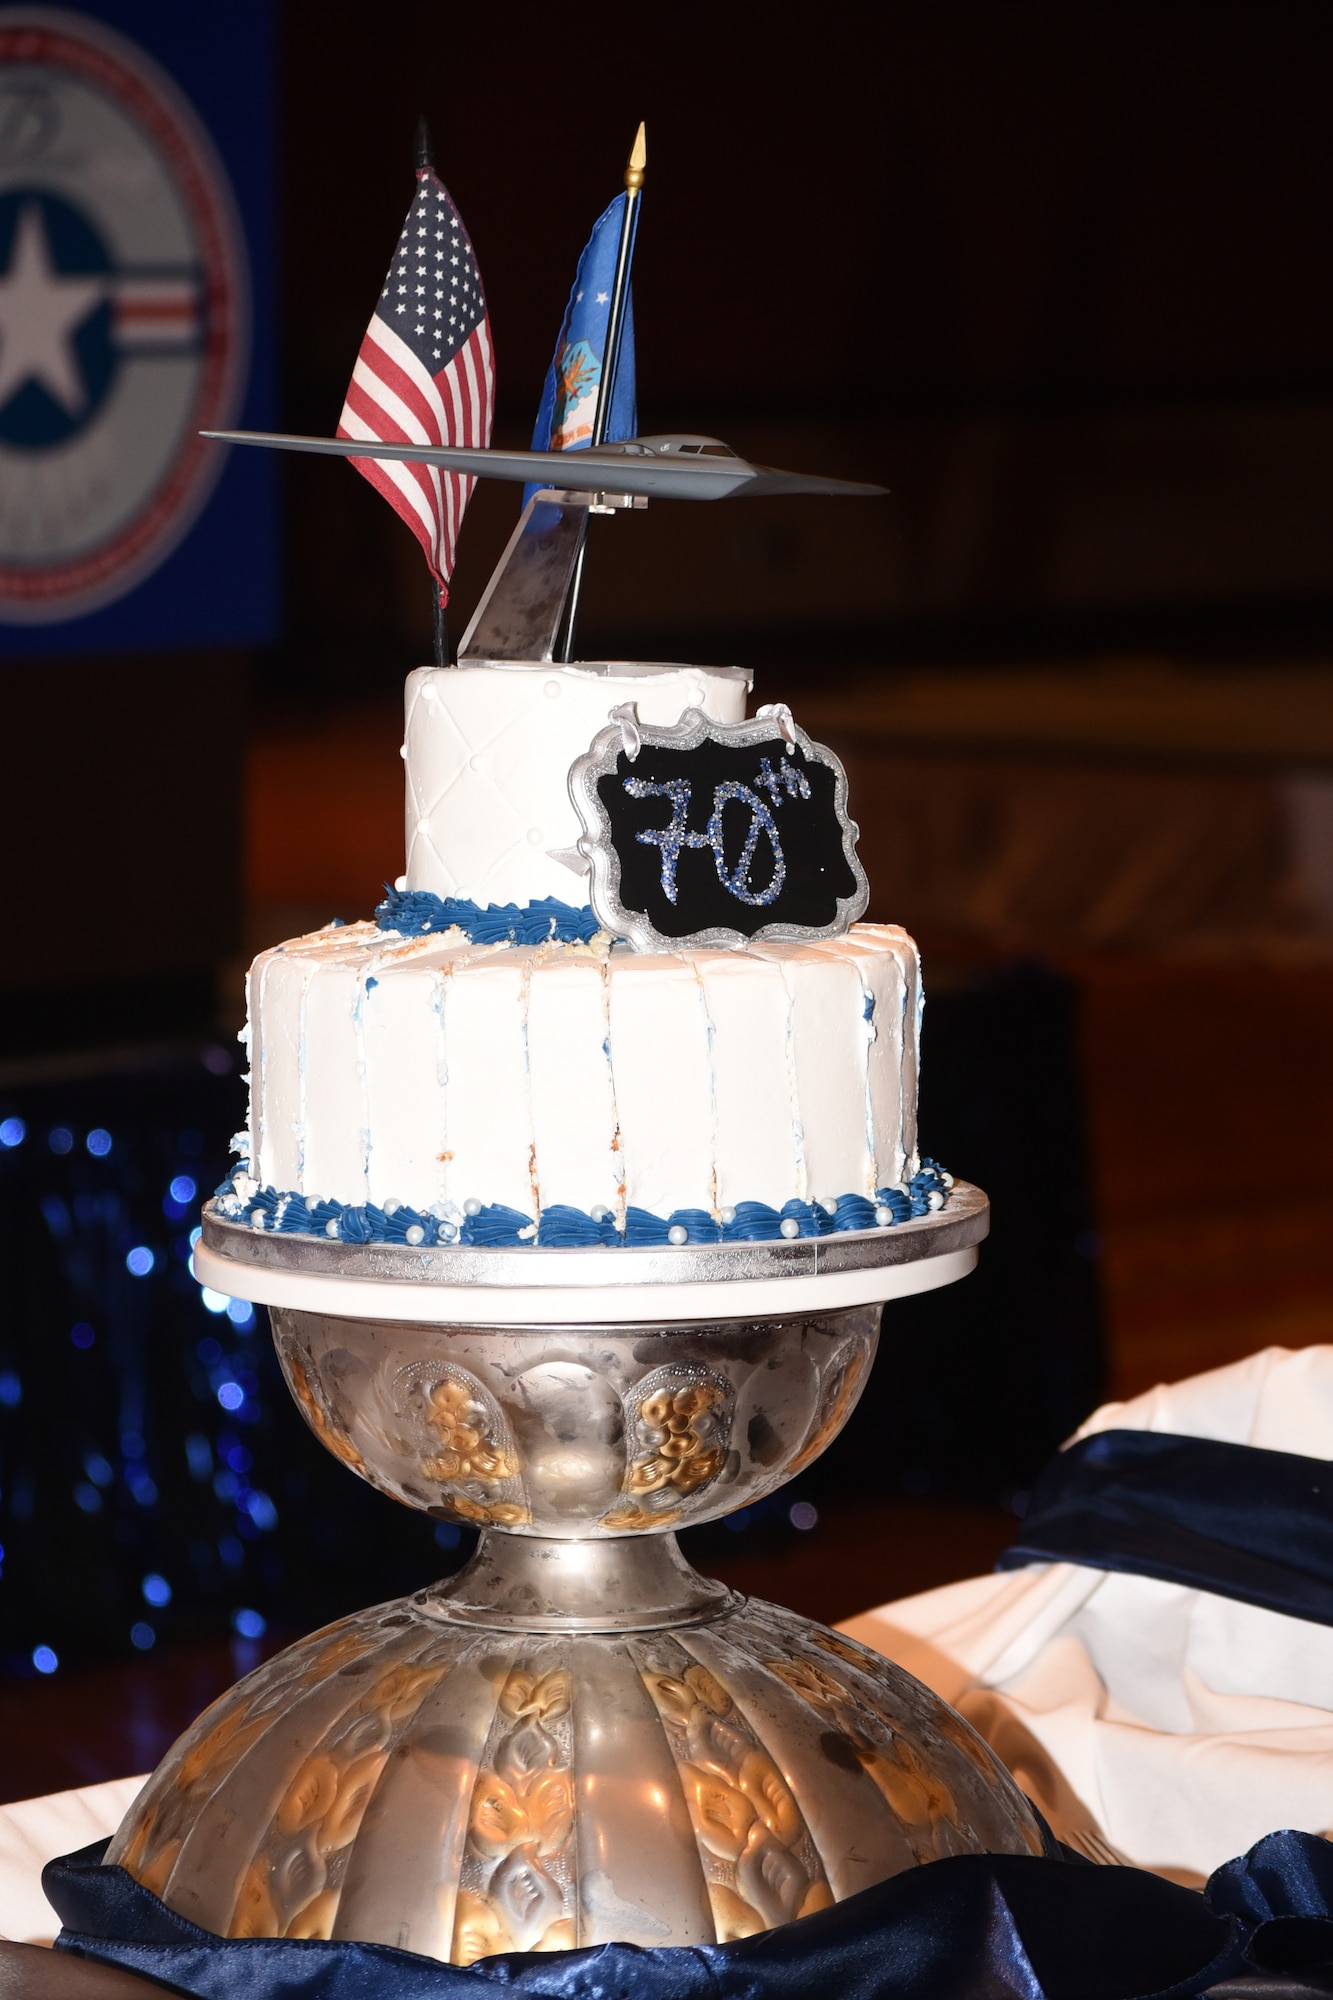 No party is complete without a cake. This was the official cake of the 2017 Air Force Ball, celebrating the 70th birthday of the United States Air Force.